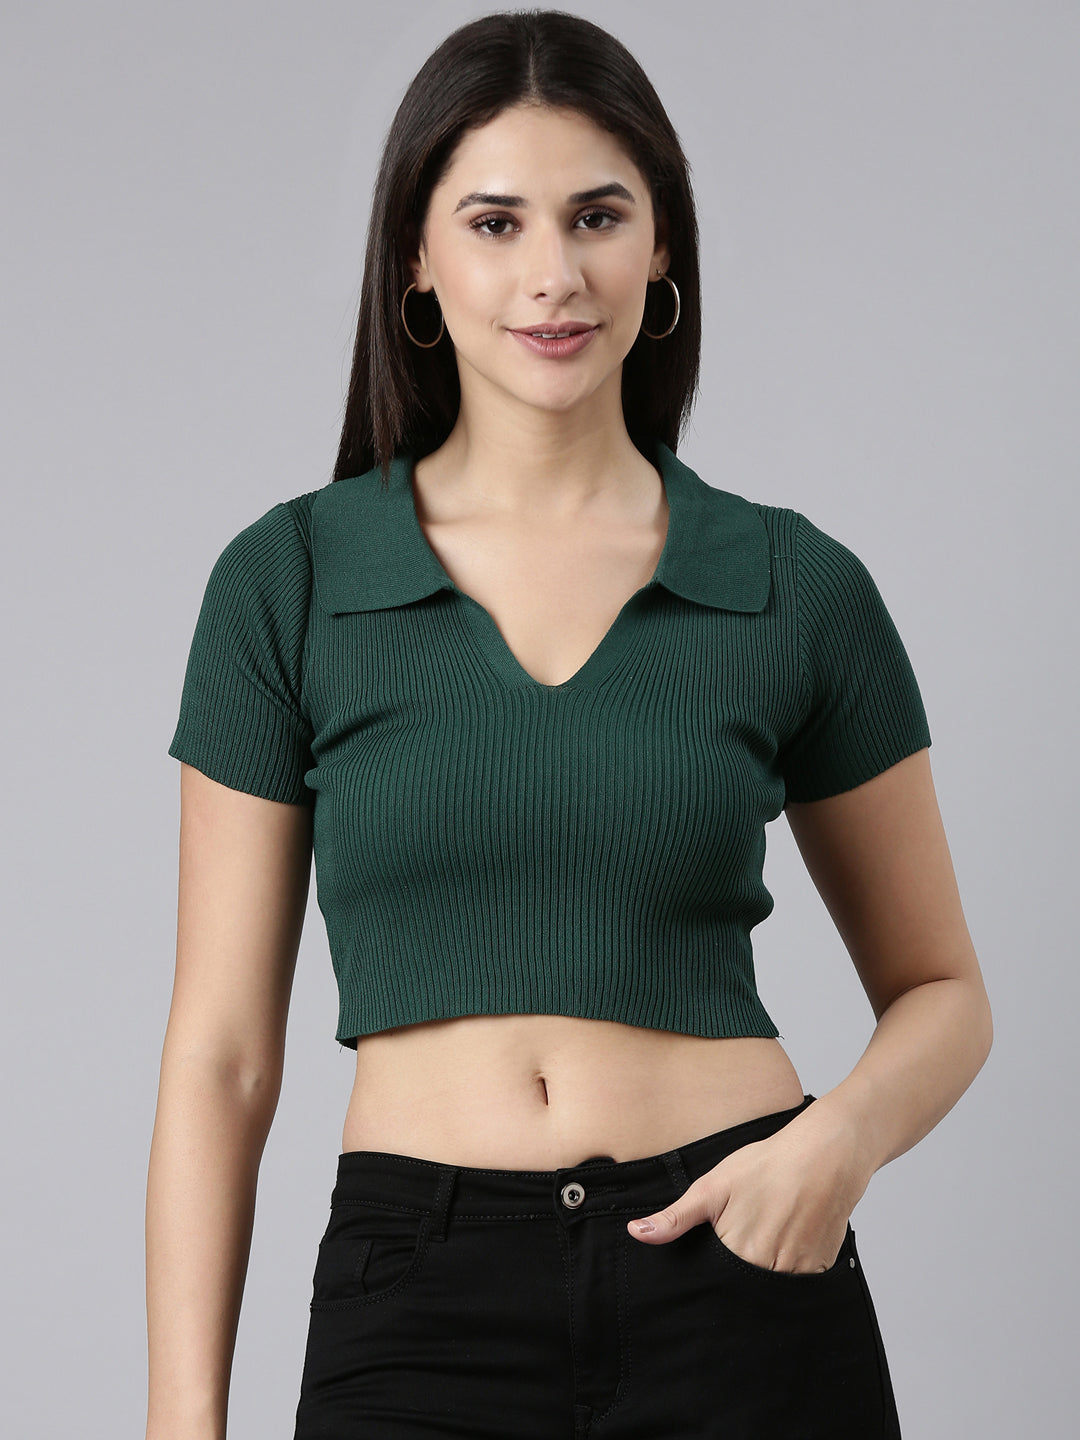 Above the Keyboard Collar Solid Green Crop Top